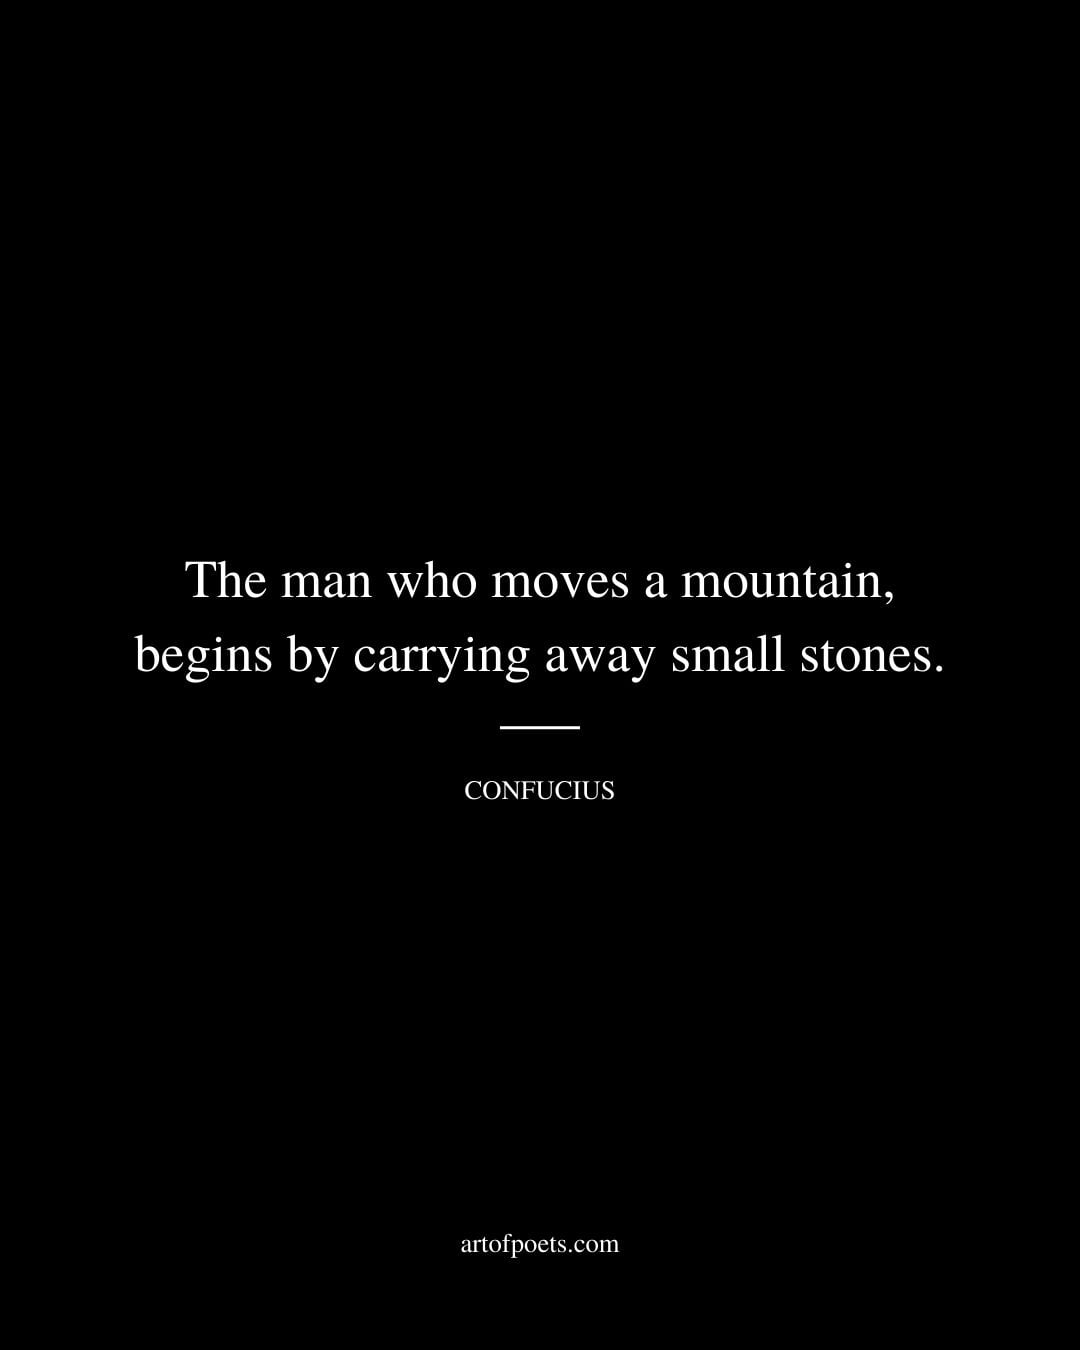 The man who moves a mountain begins by carrying away small stones